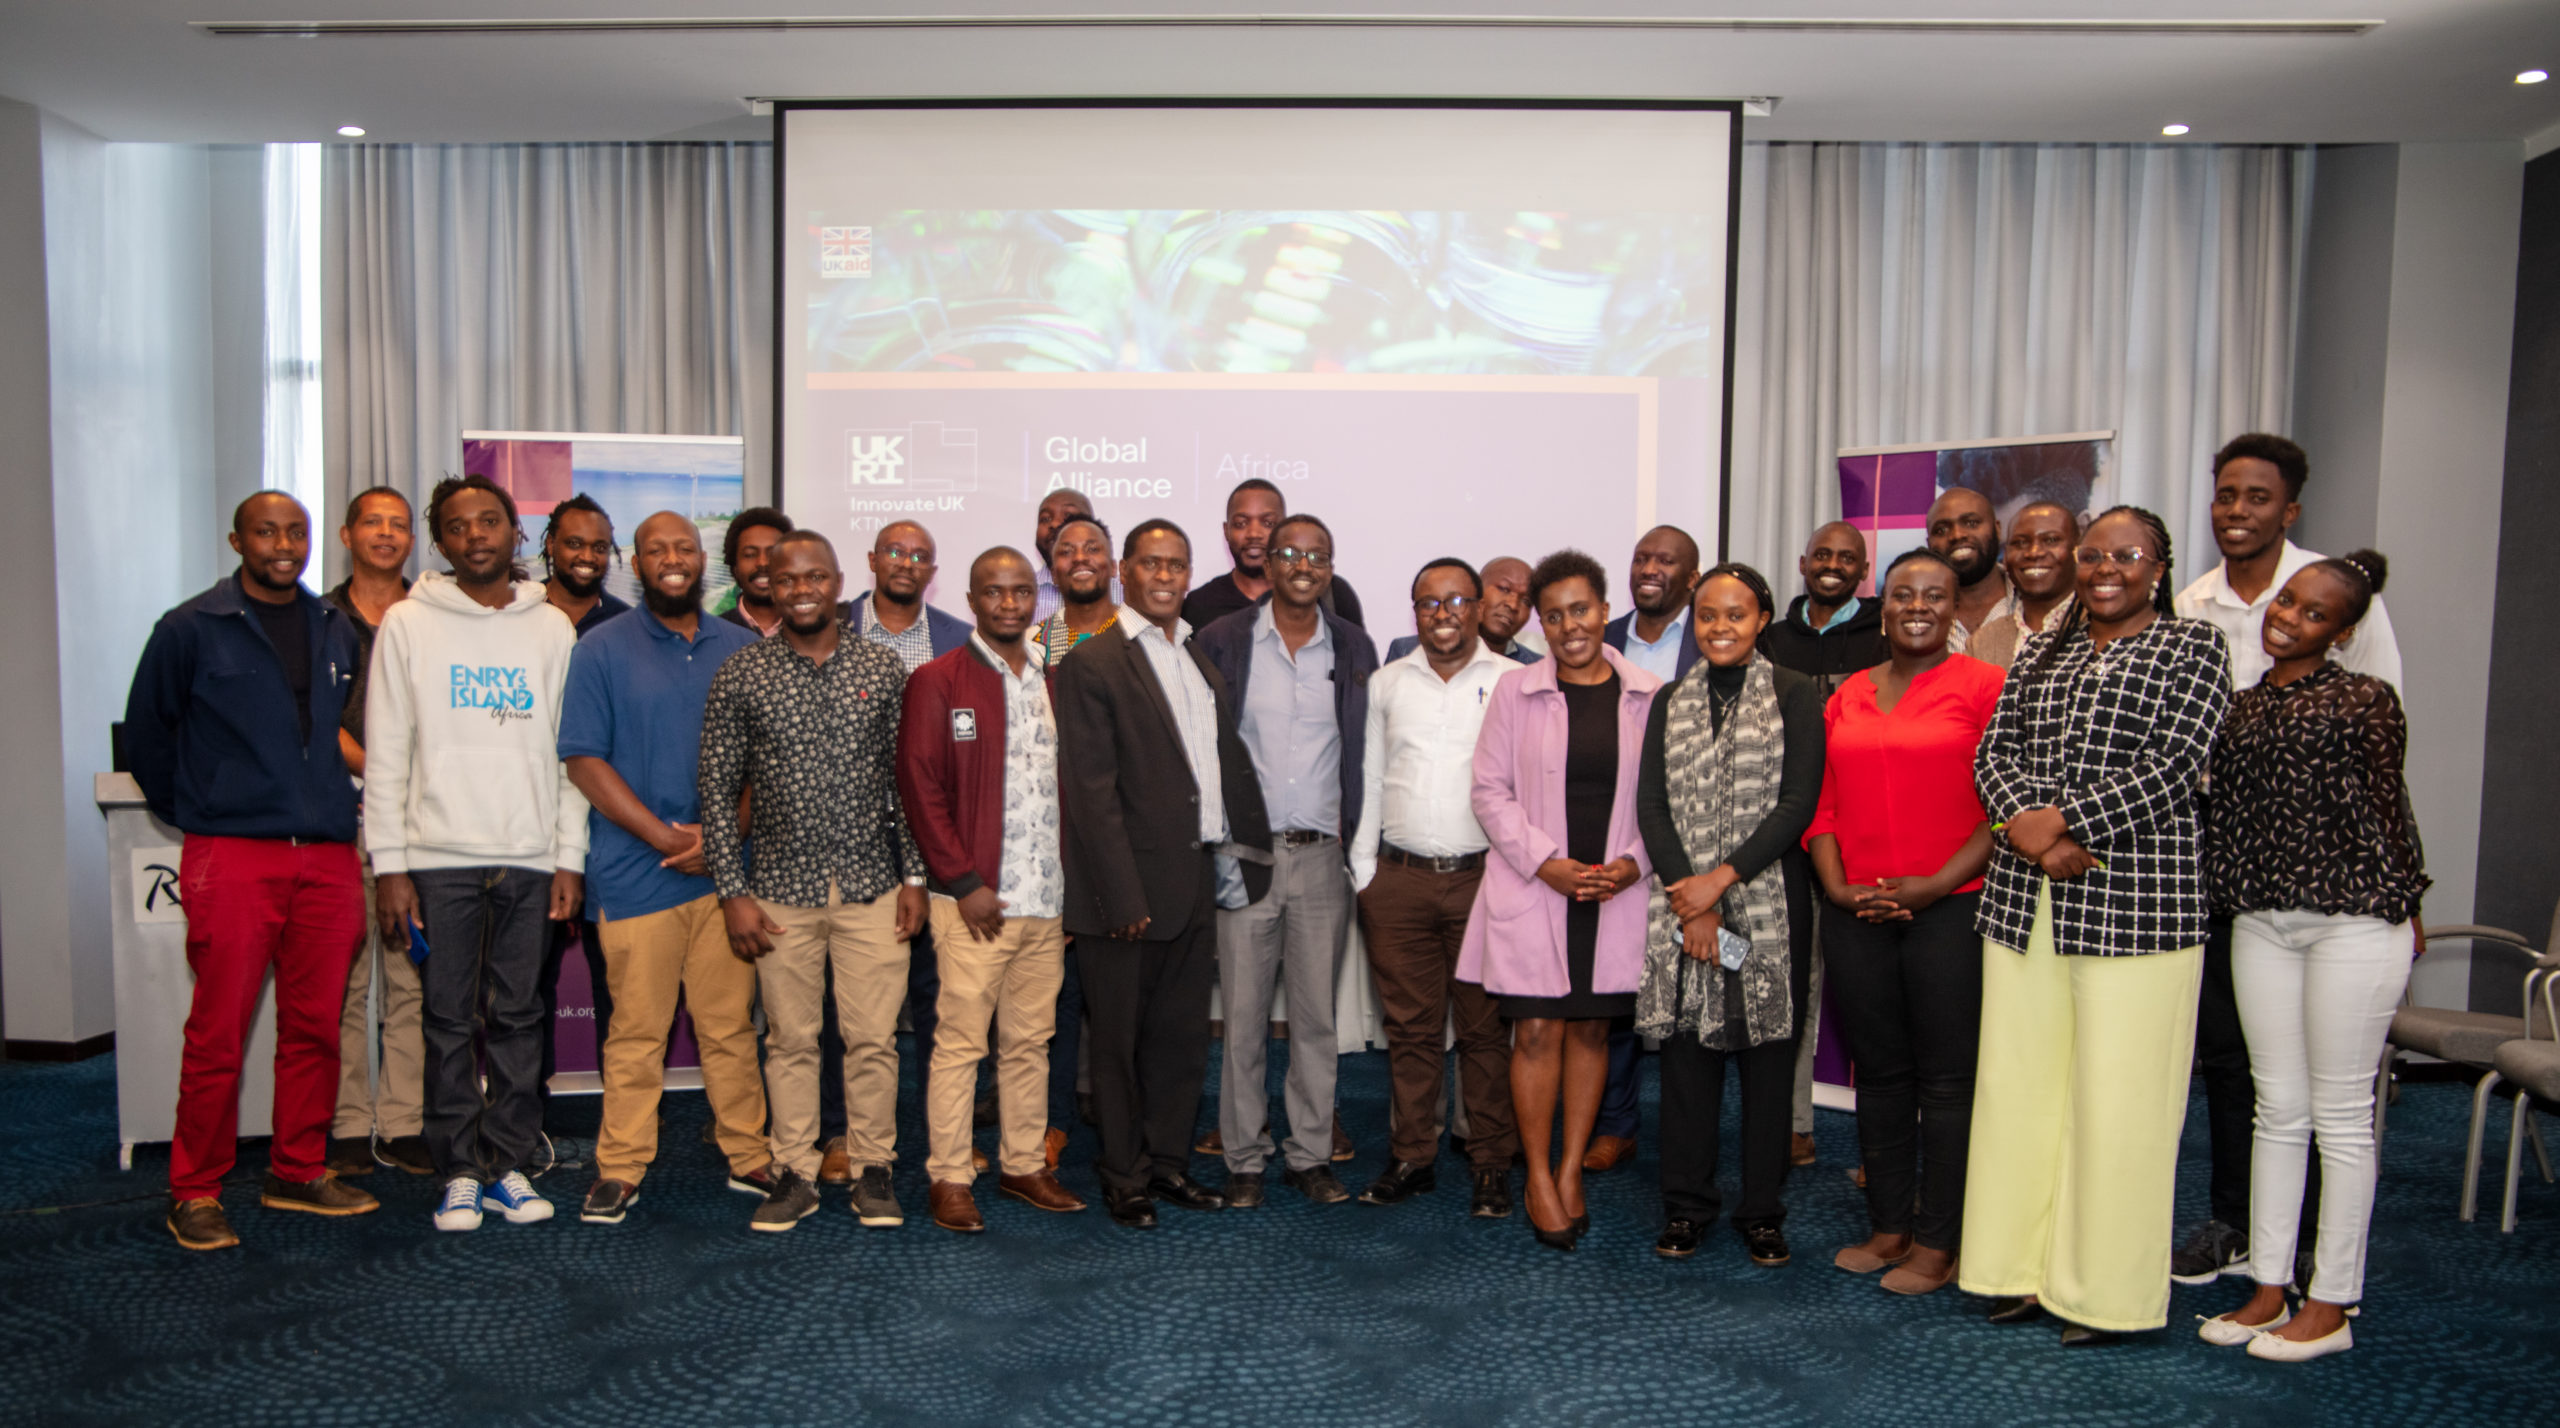 Highlights from the Global Alliance Africa Kenya Energy Catalyst Competition Information Event